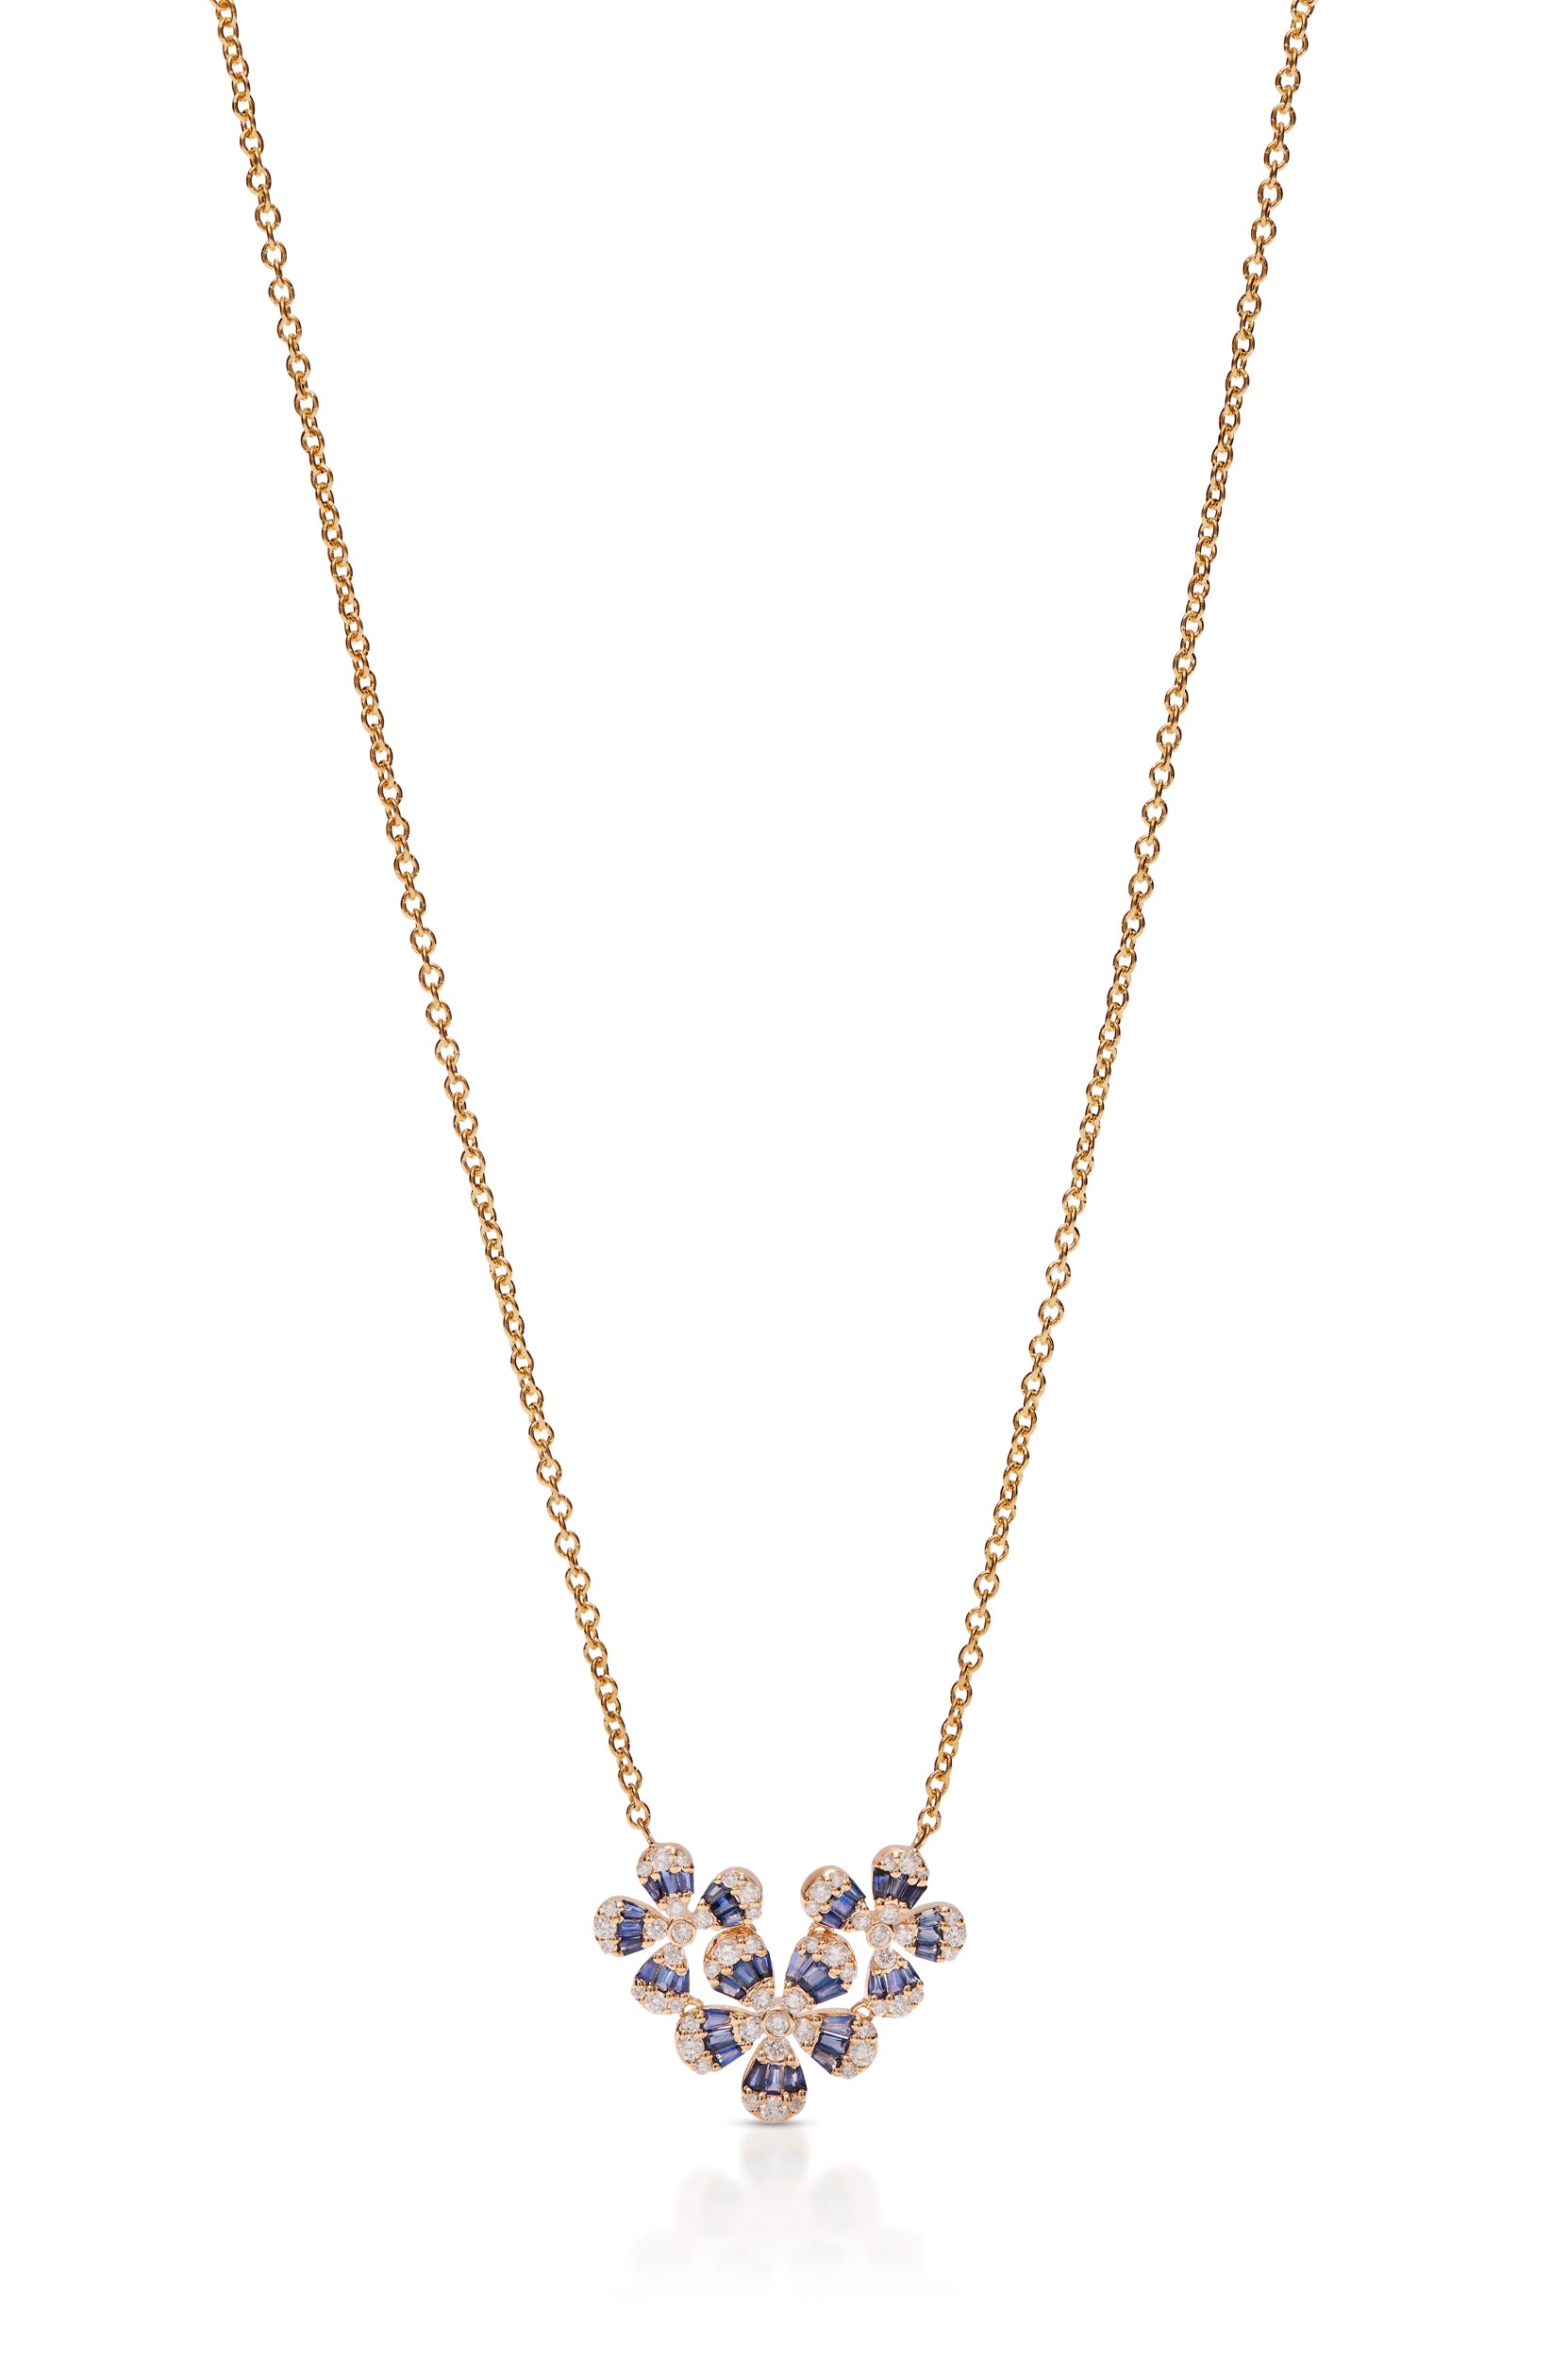 14KY Diamond and Sapphire Triple Flower Necklace